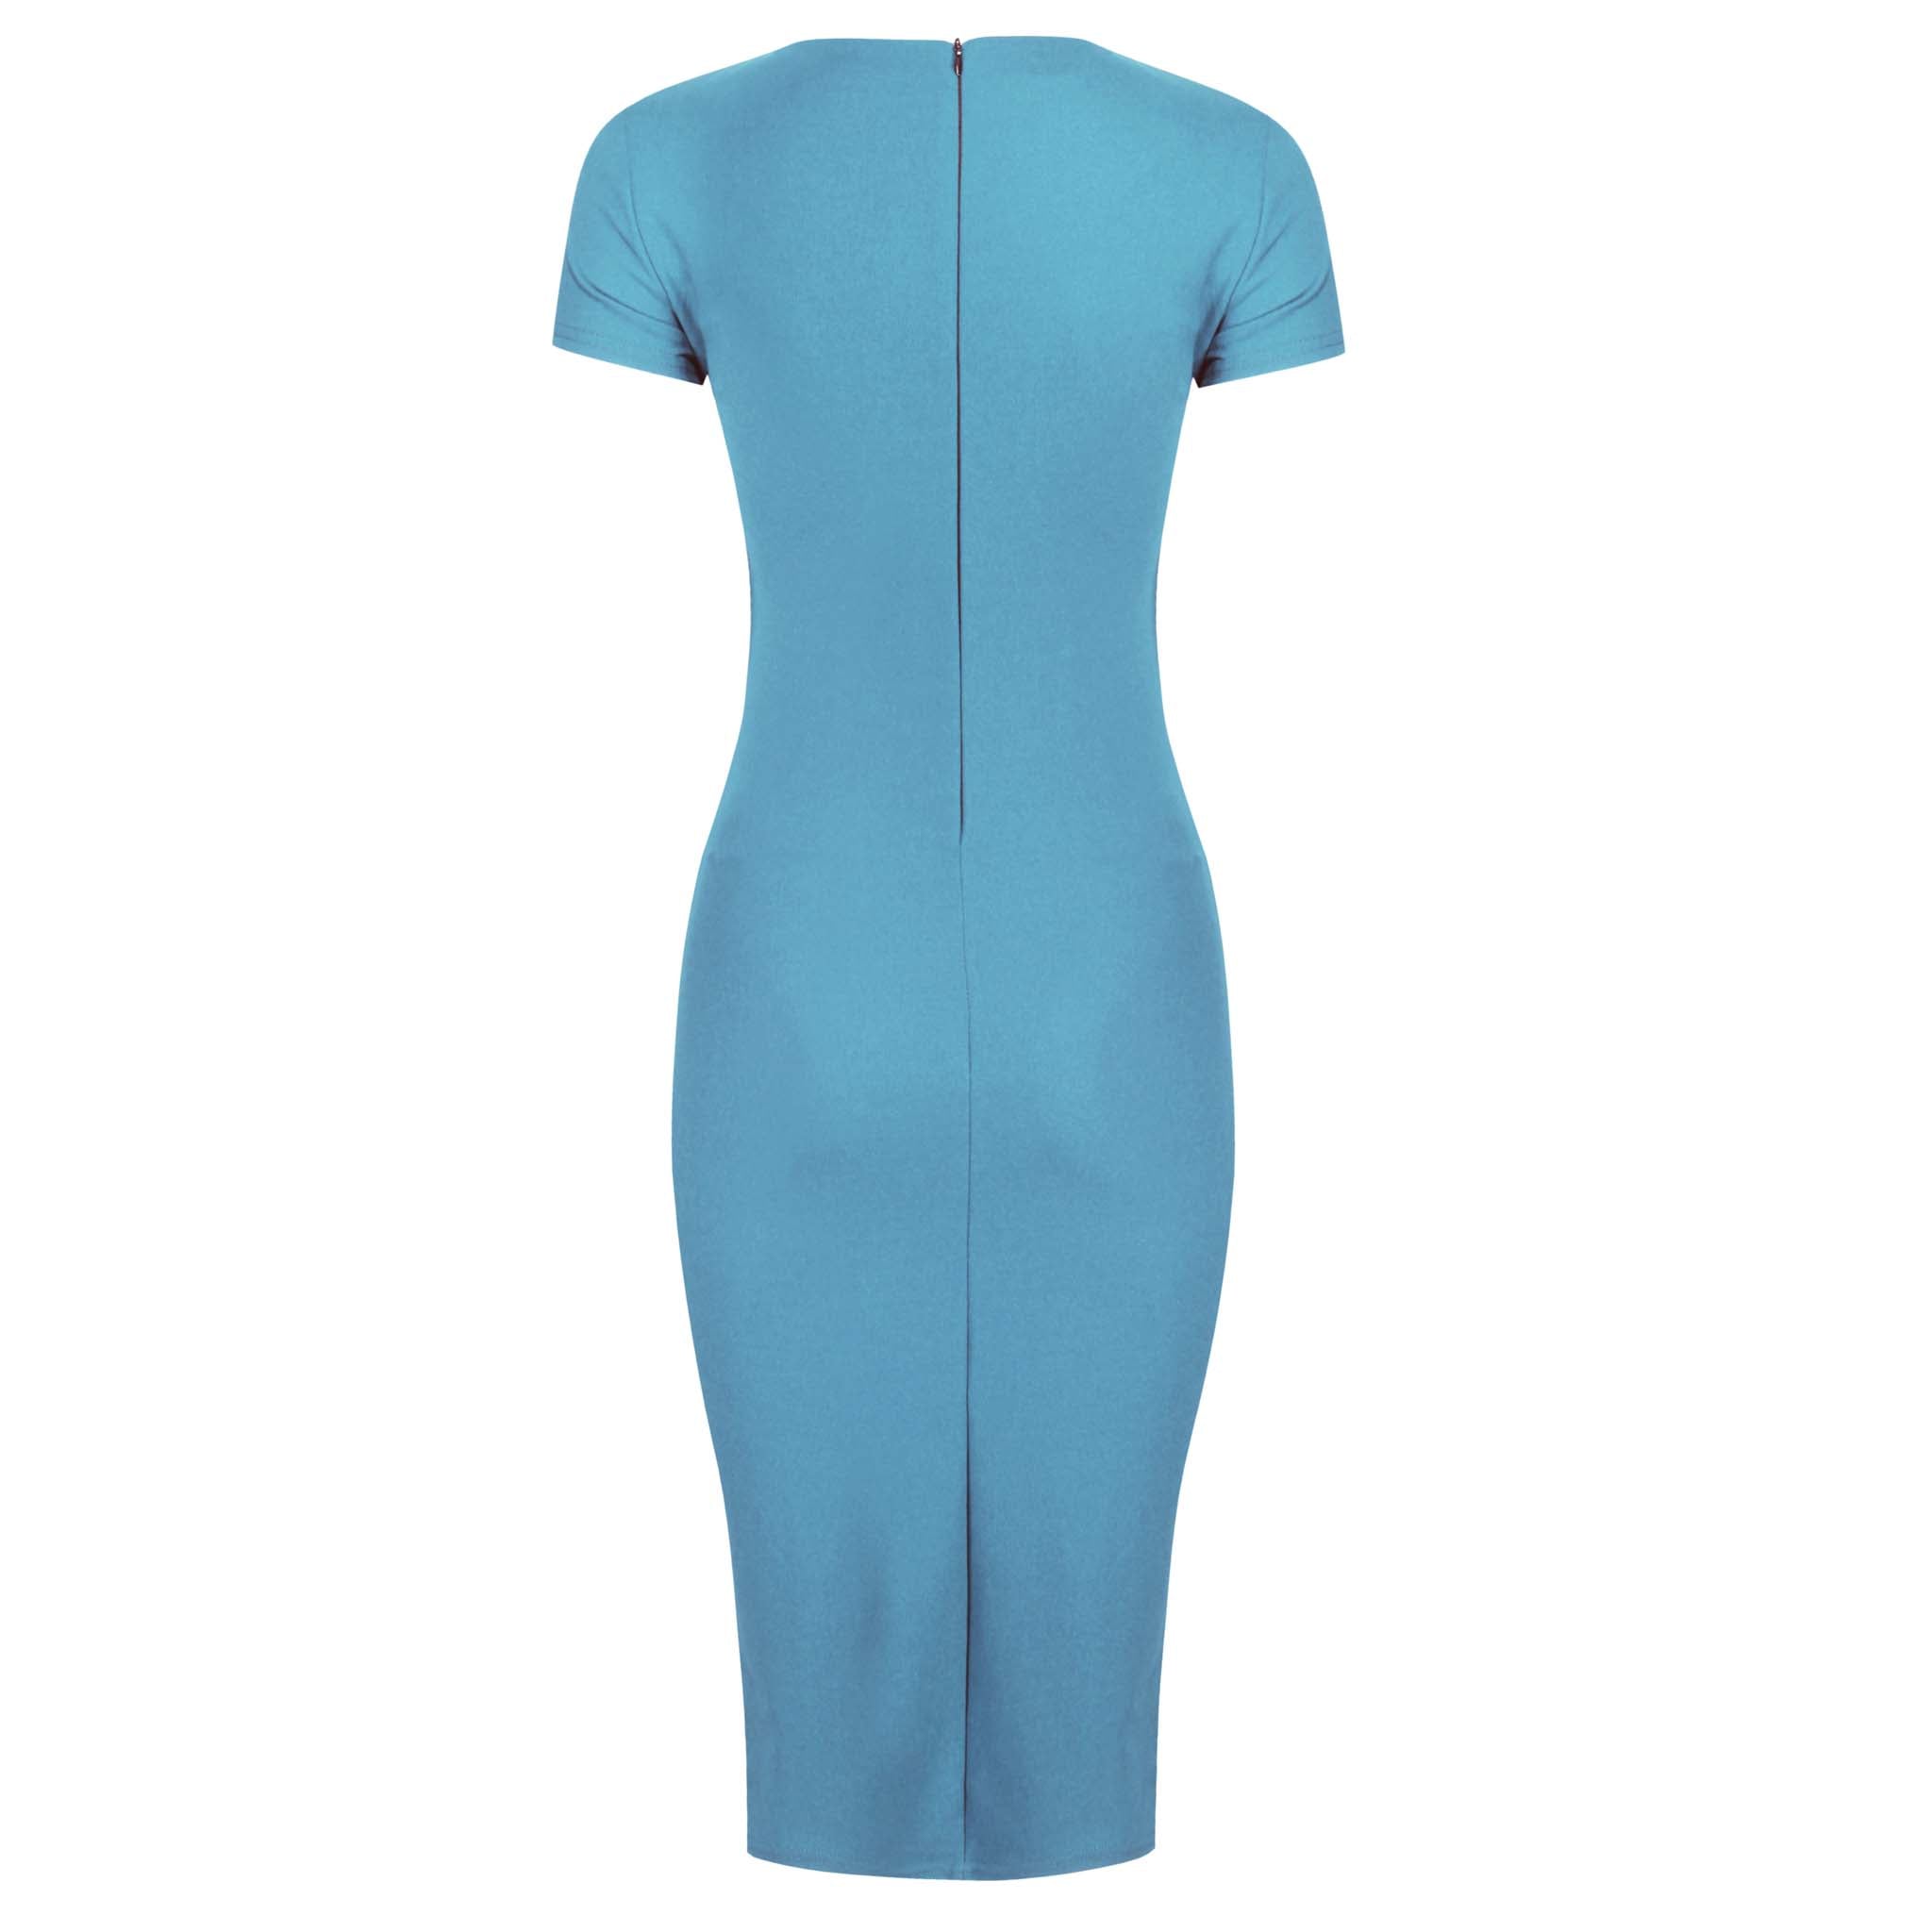 Pretty Blue Short Sleeve Ruched Tie Bodycon Pencil Dress